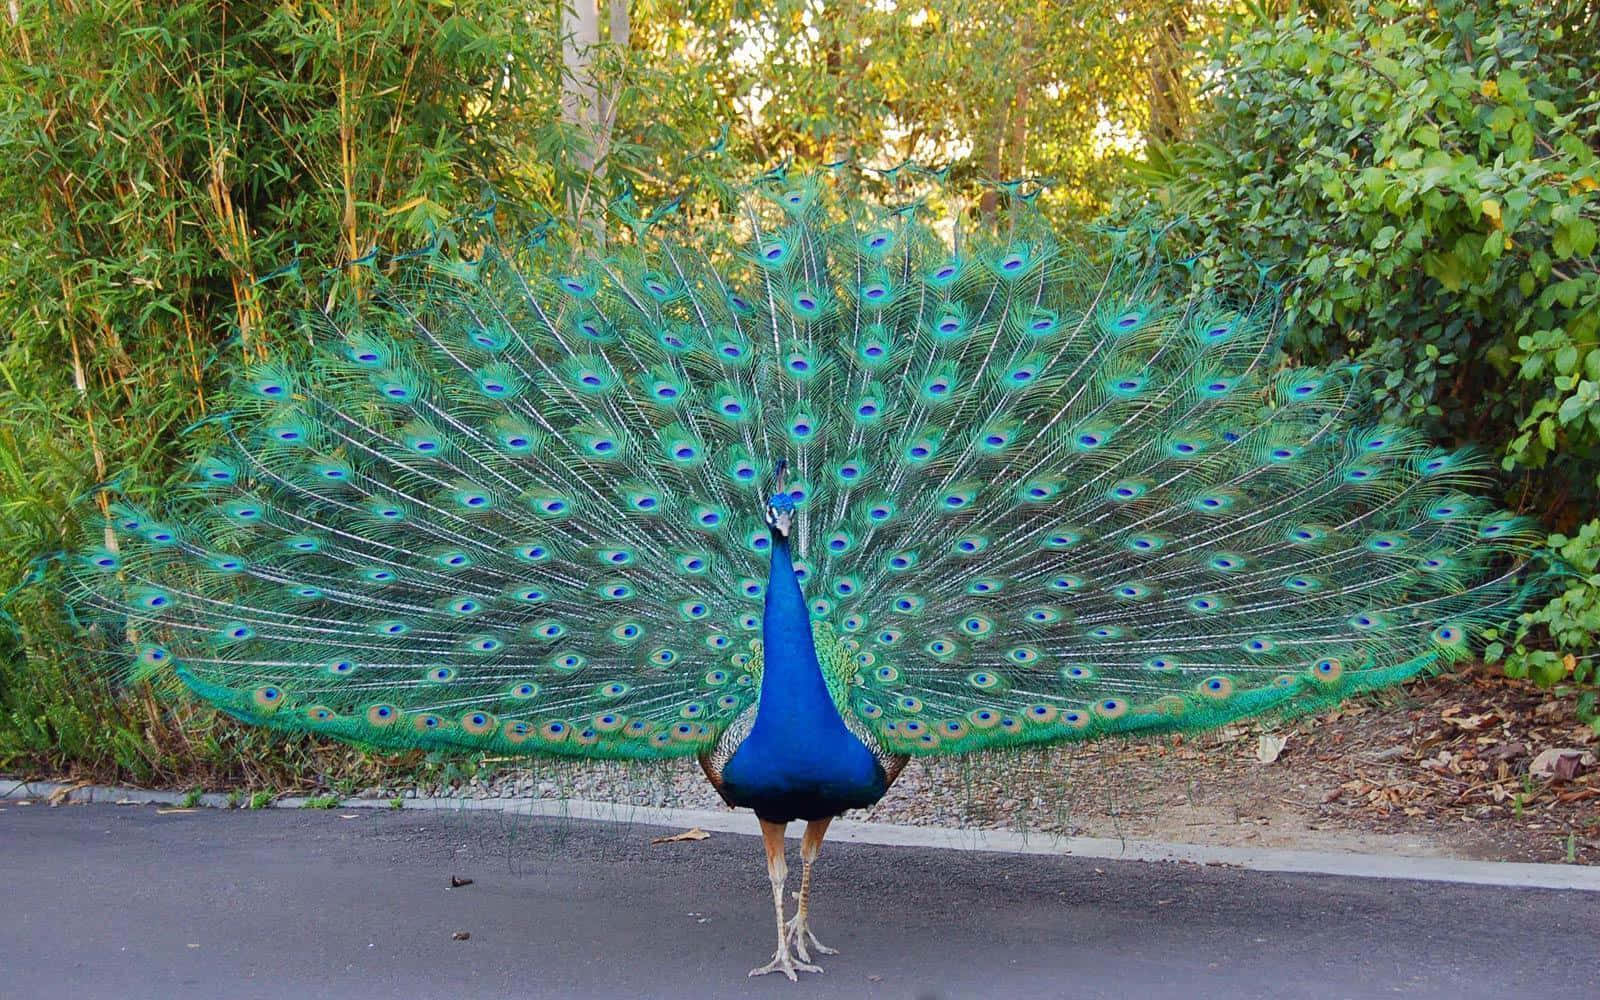 Beautifully Colored Peacock strutting its feathers